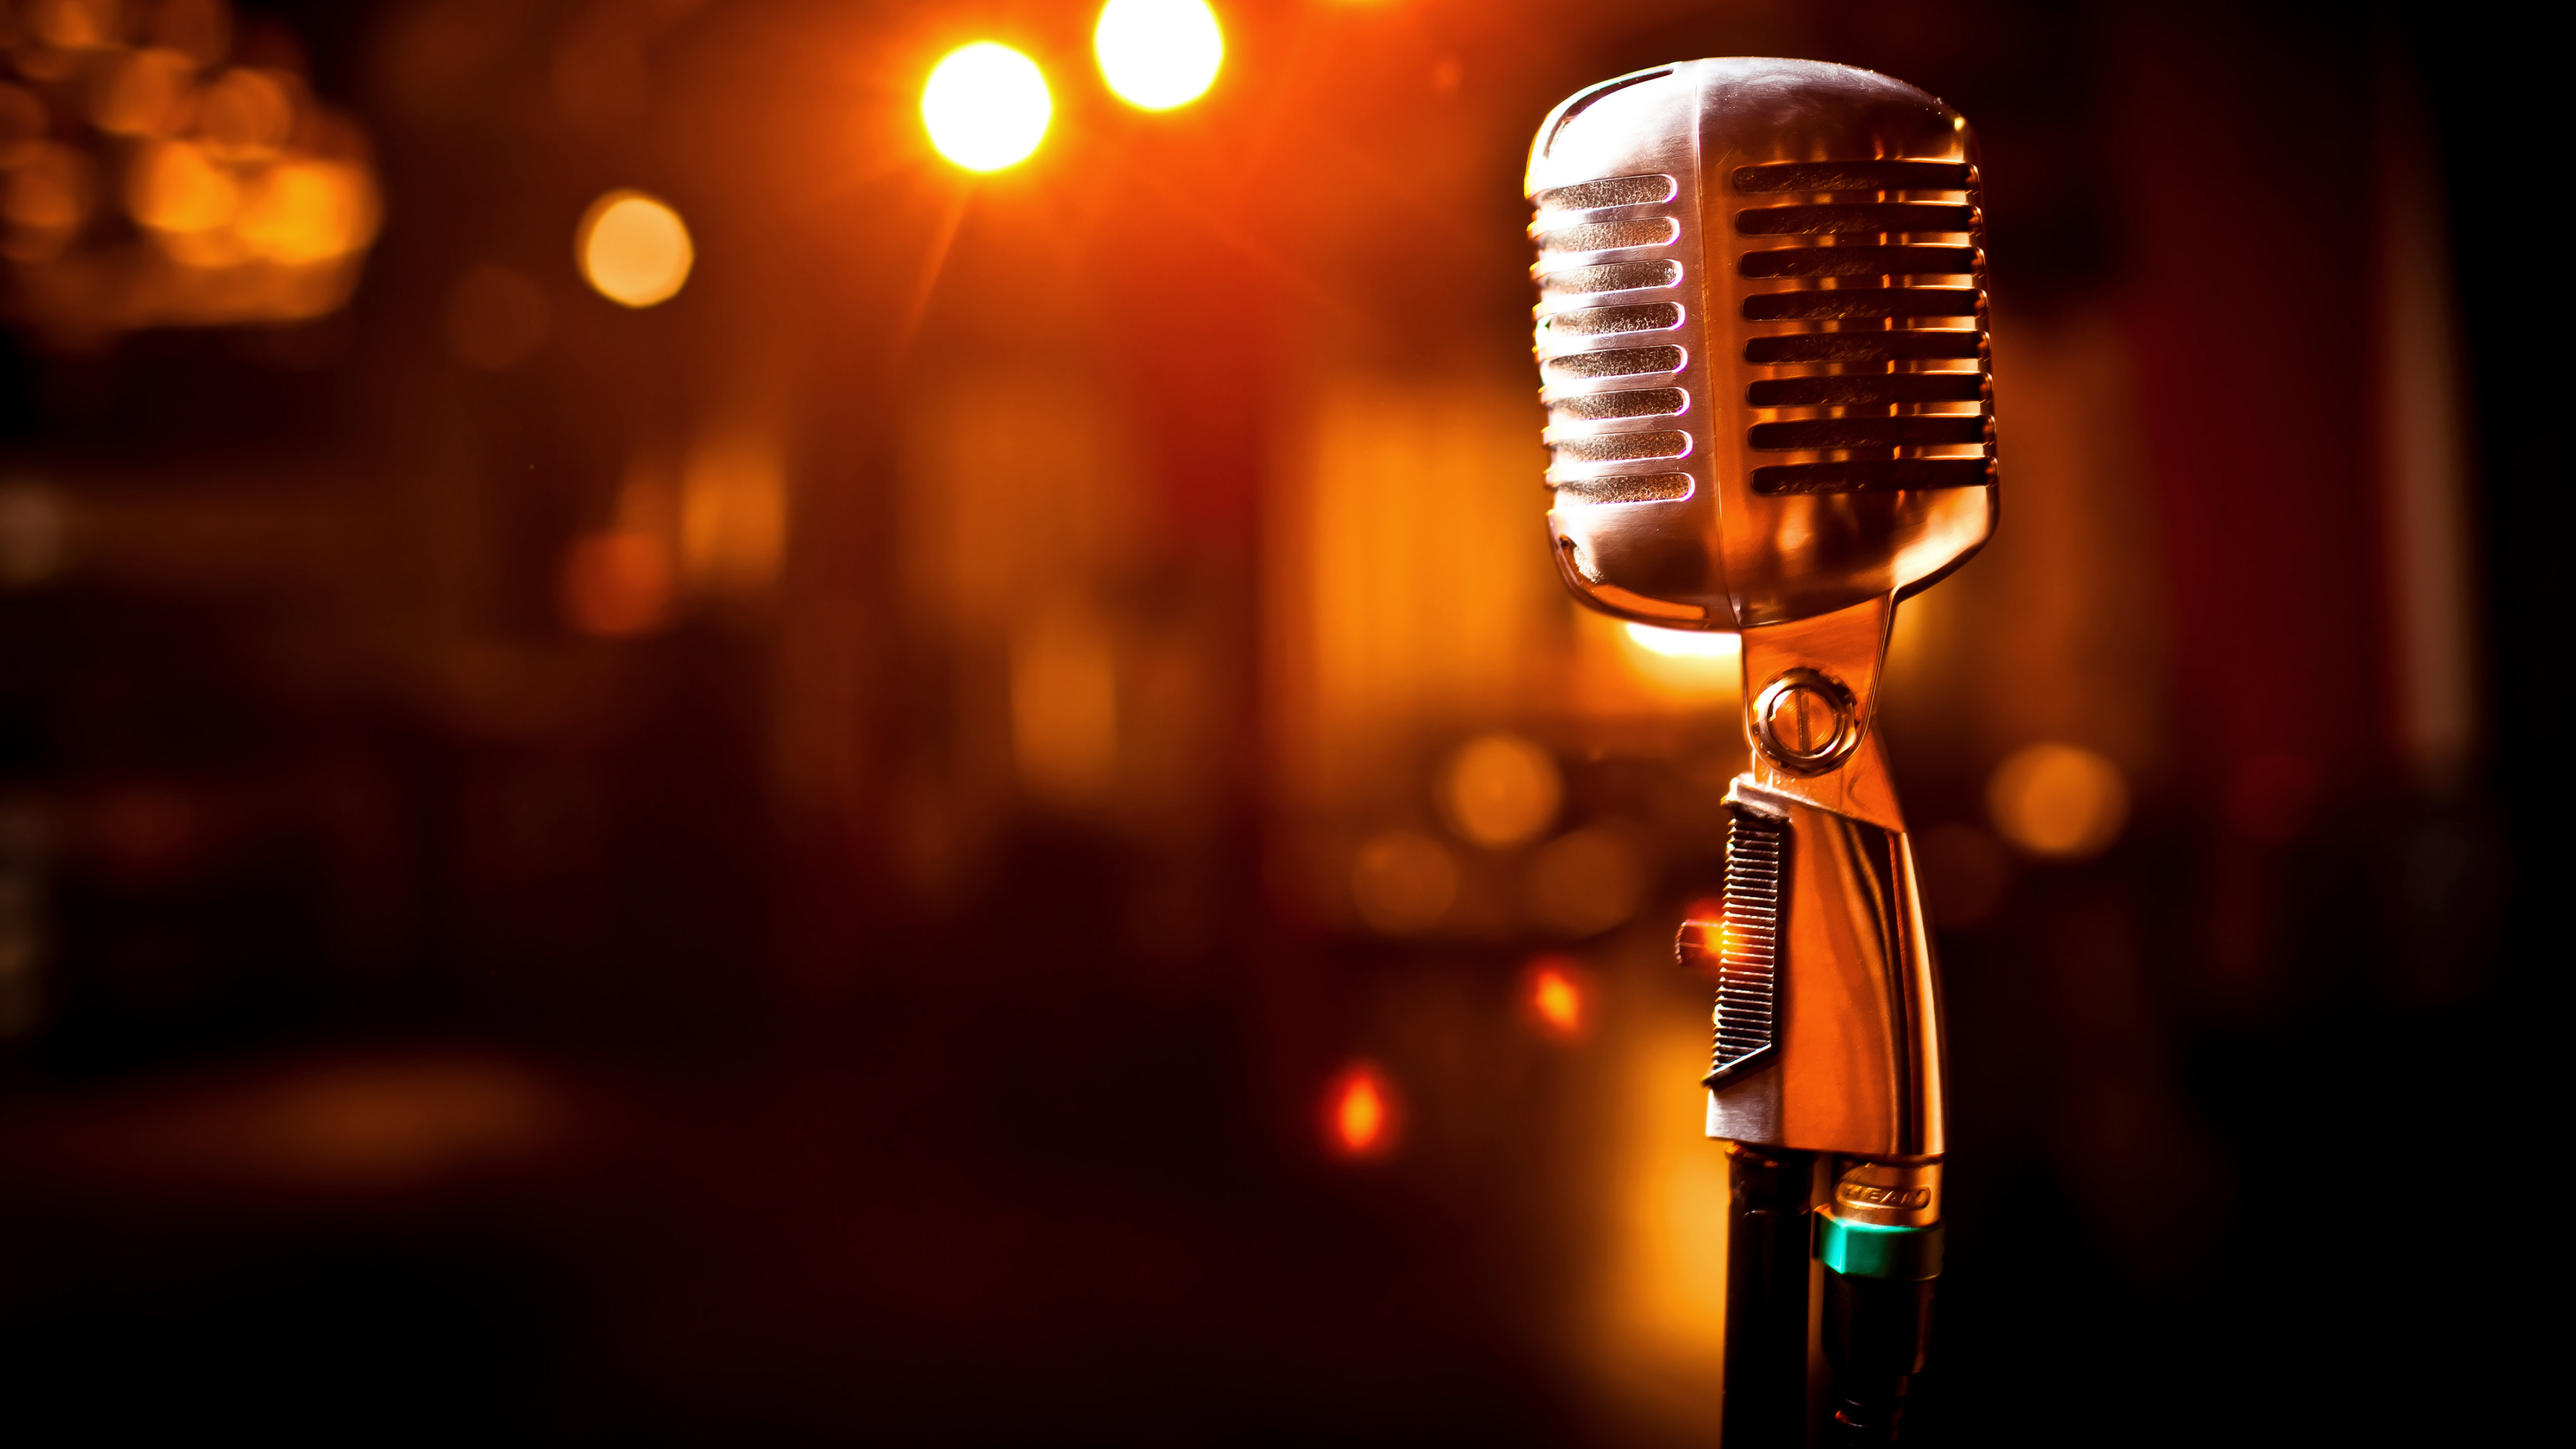 Microphone Backgrounds, Compatible - PC, Mobile, Gadgets| 3840x2160 px